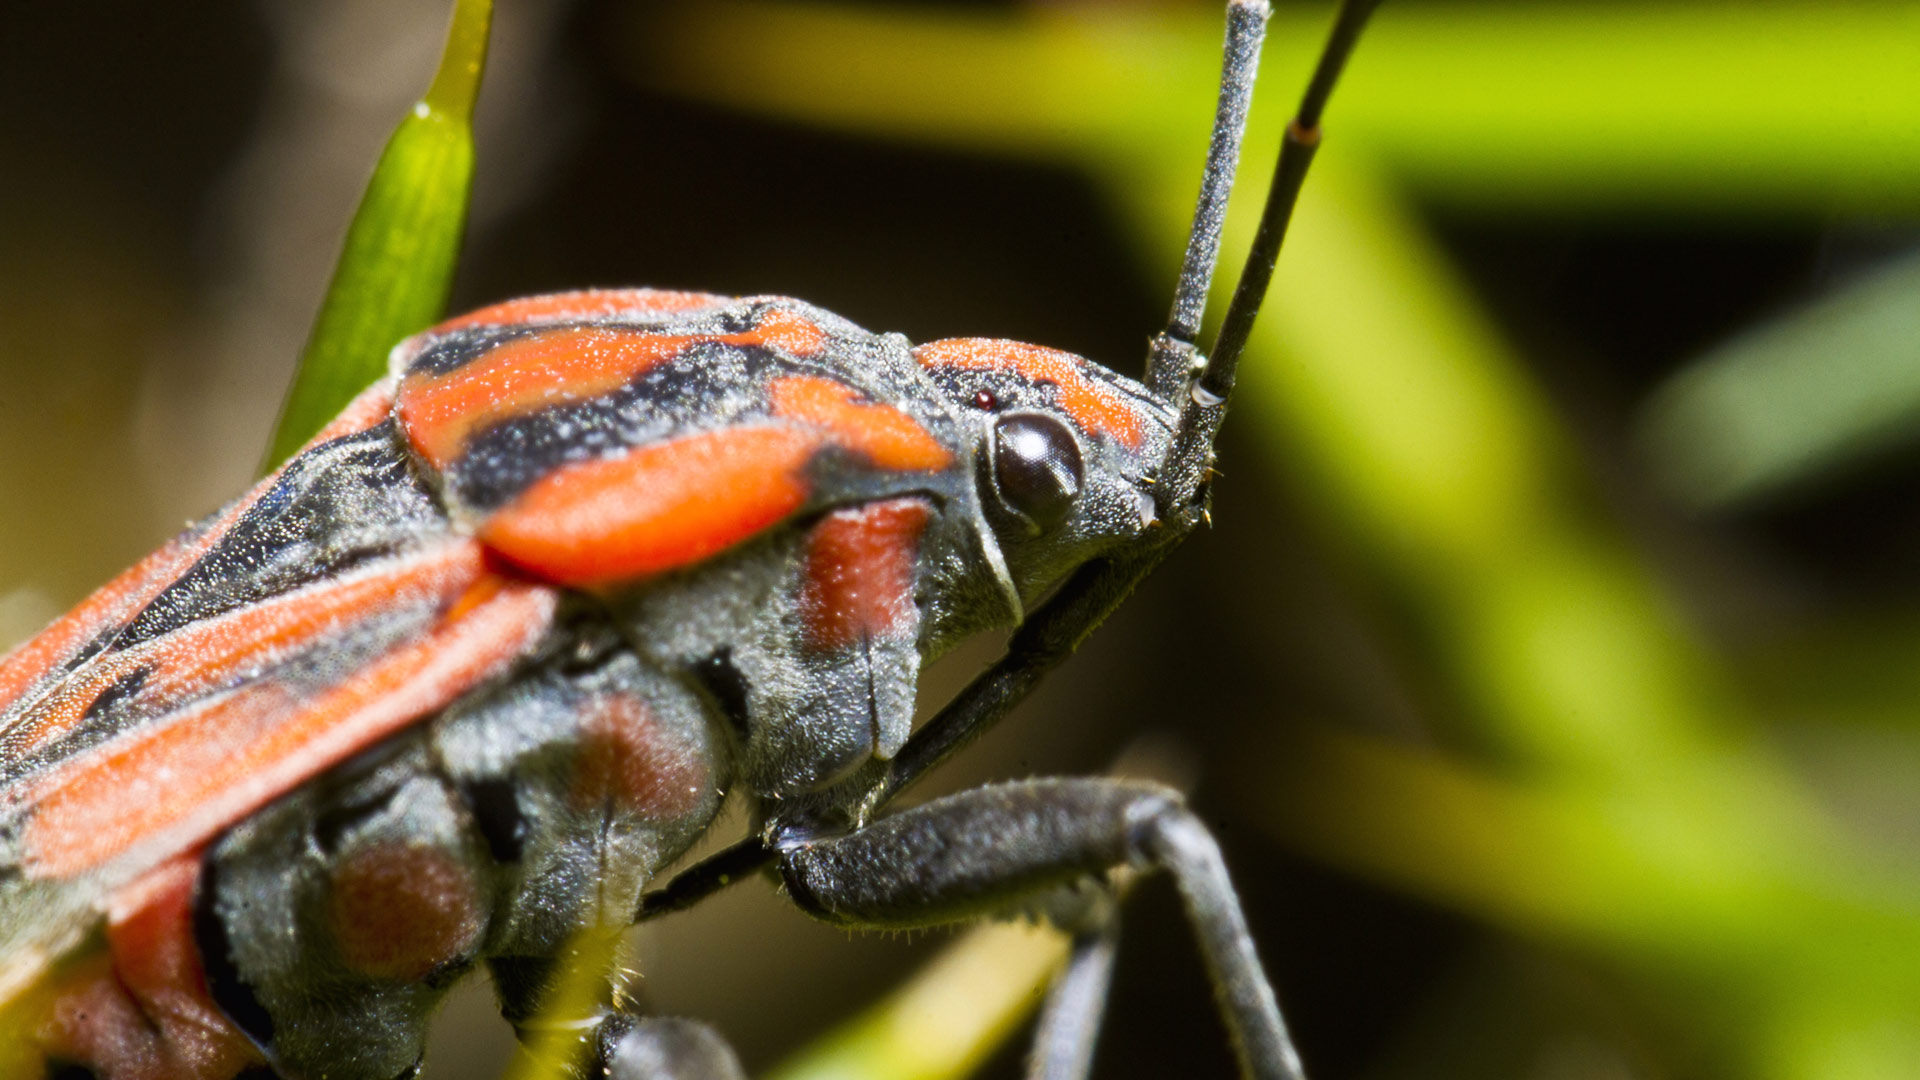 Have Chinch Bugs Invaded Your Turf? Don’t Panic, Here’s What to Do